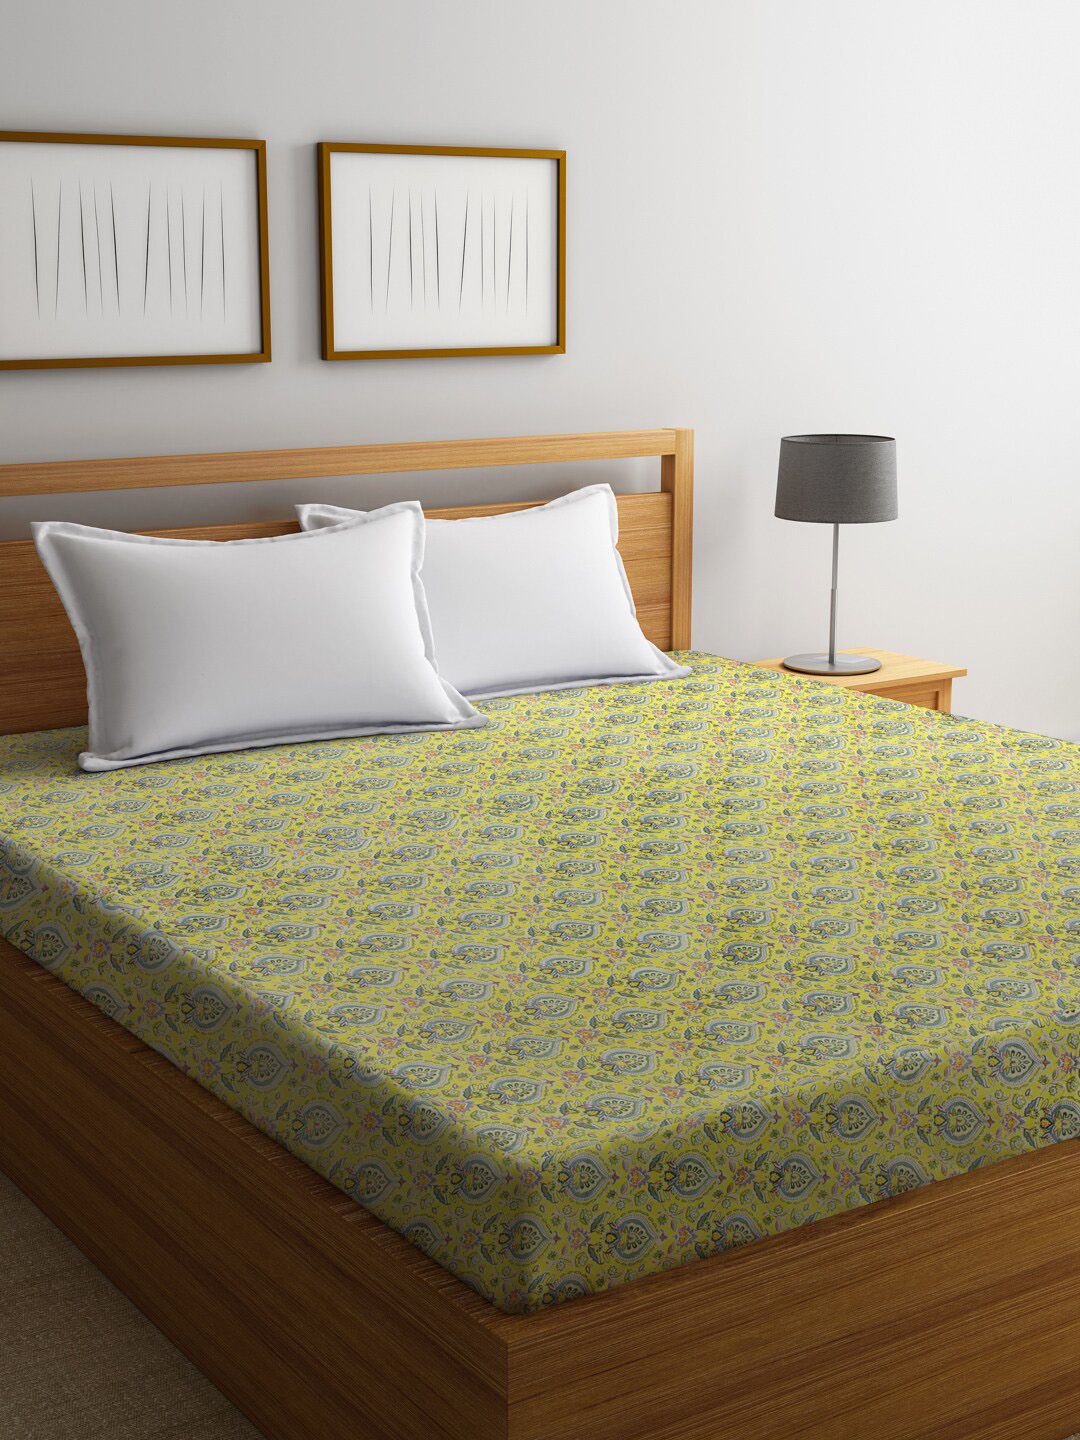 Rajasthan Decor Yellow & Blue Screen Printed Double King Size Cotton Mattress Protector Price in India